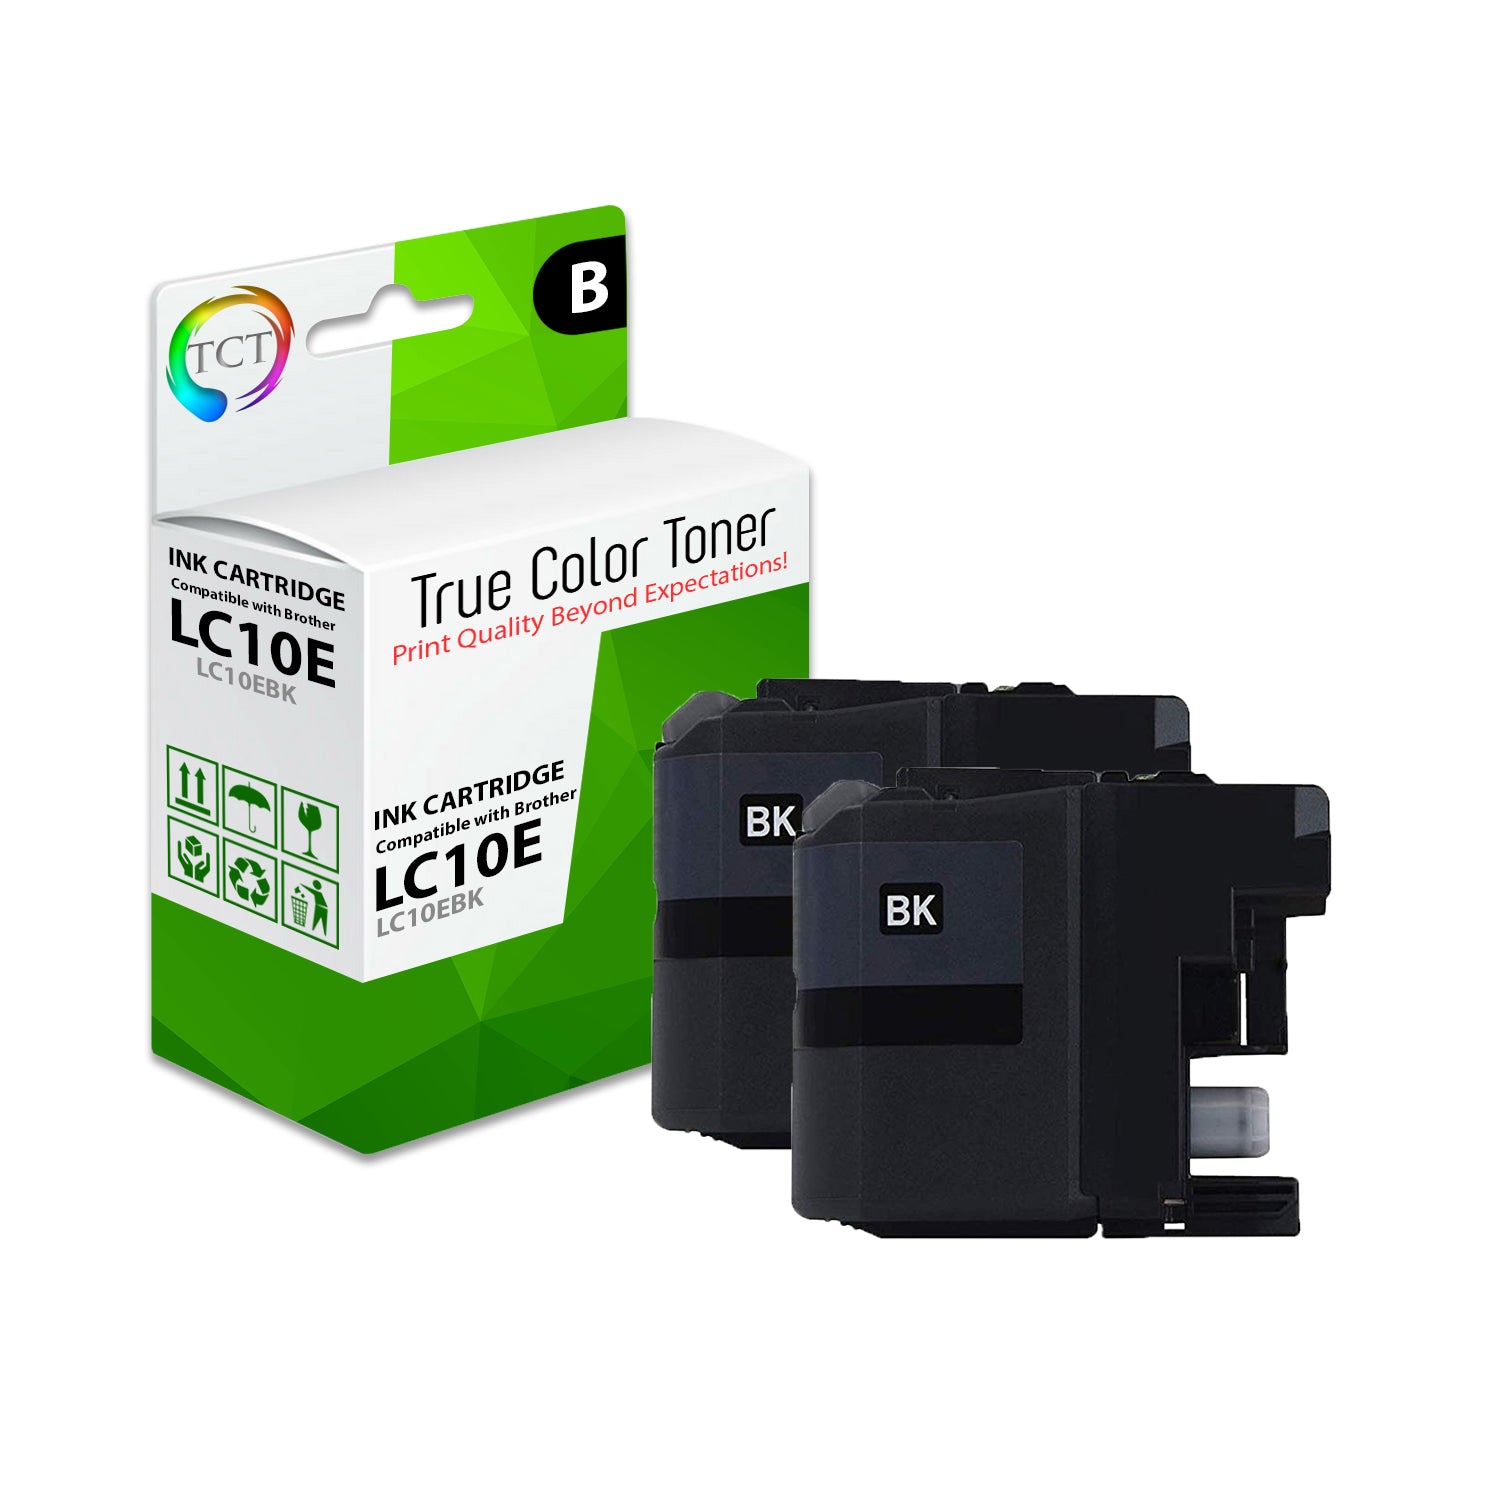 TCT Compatible Ink Cartridge Replacement for the Brother LC10E Series - 2 Pack Black